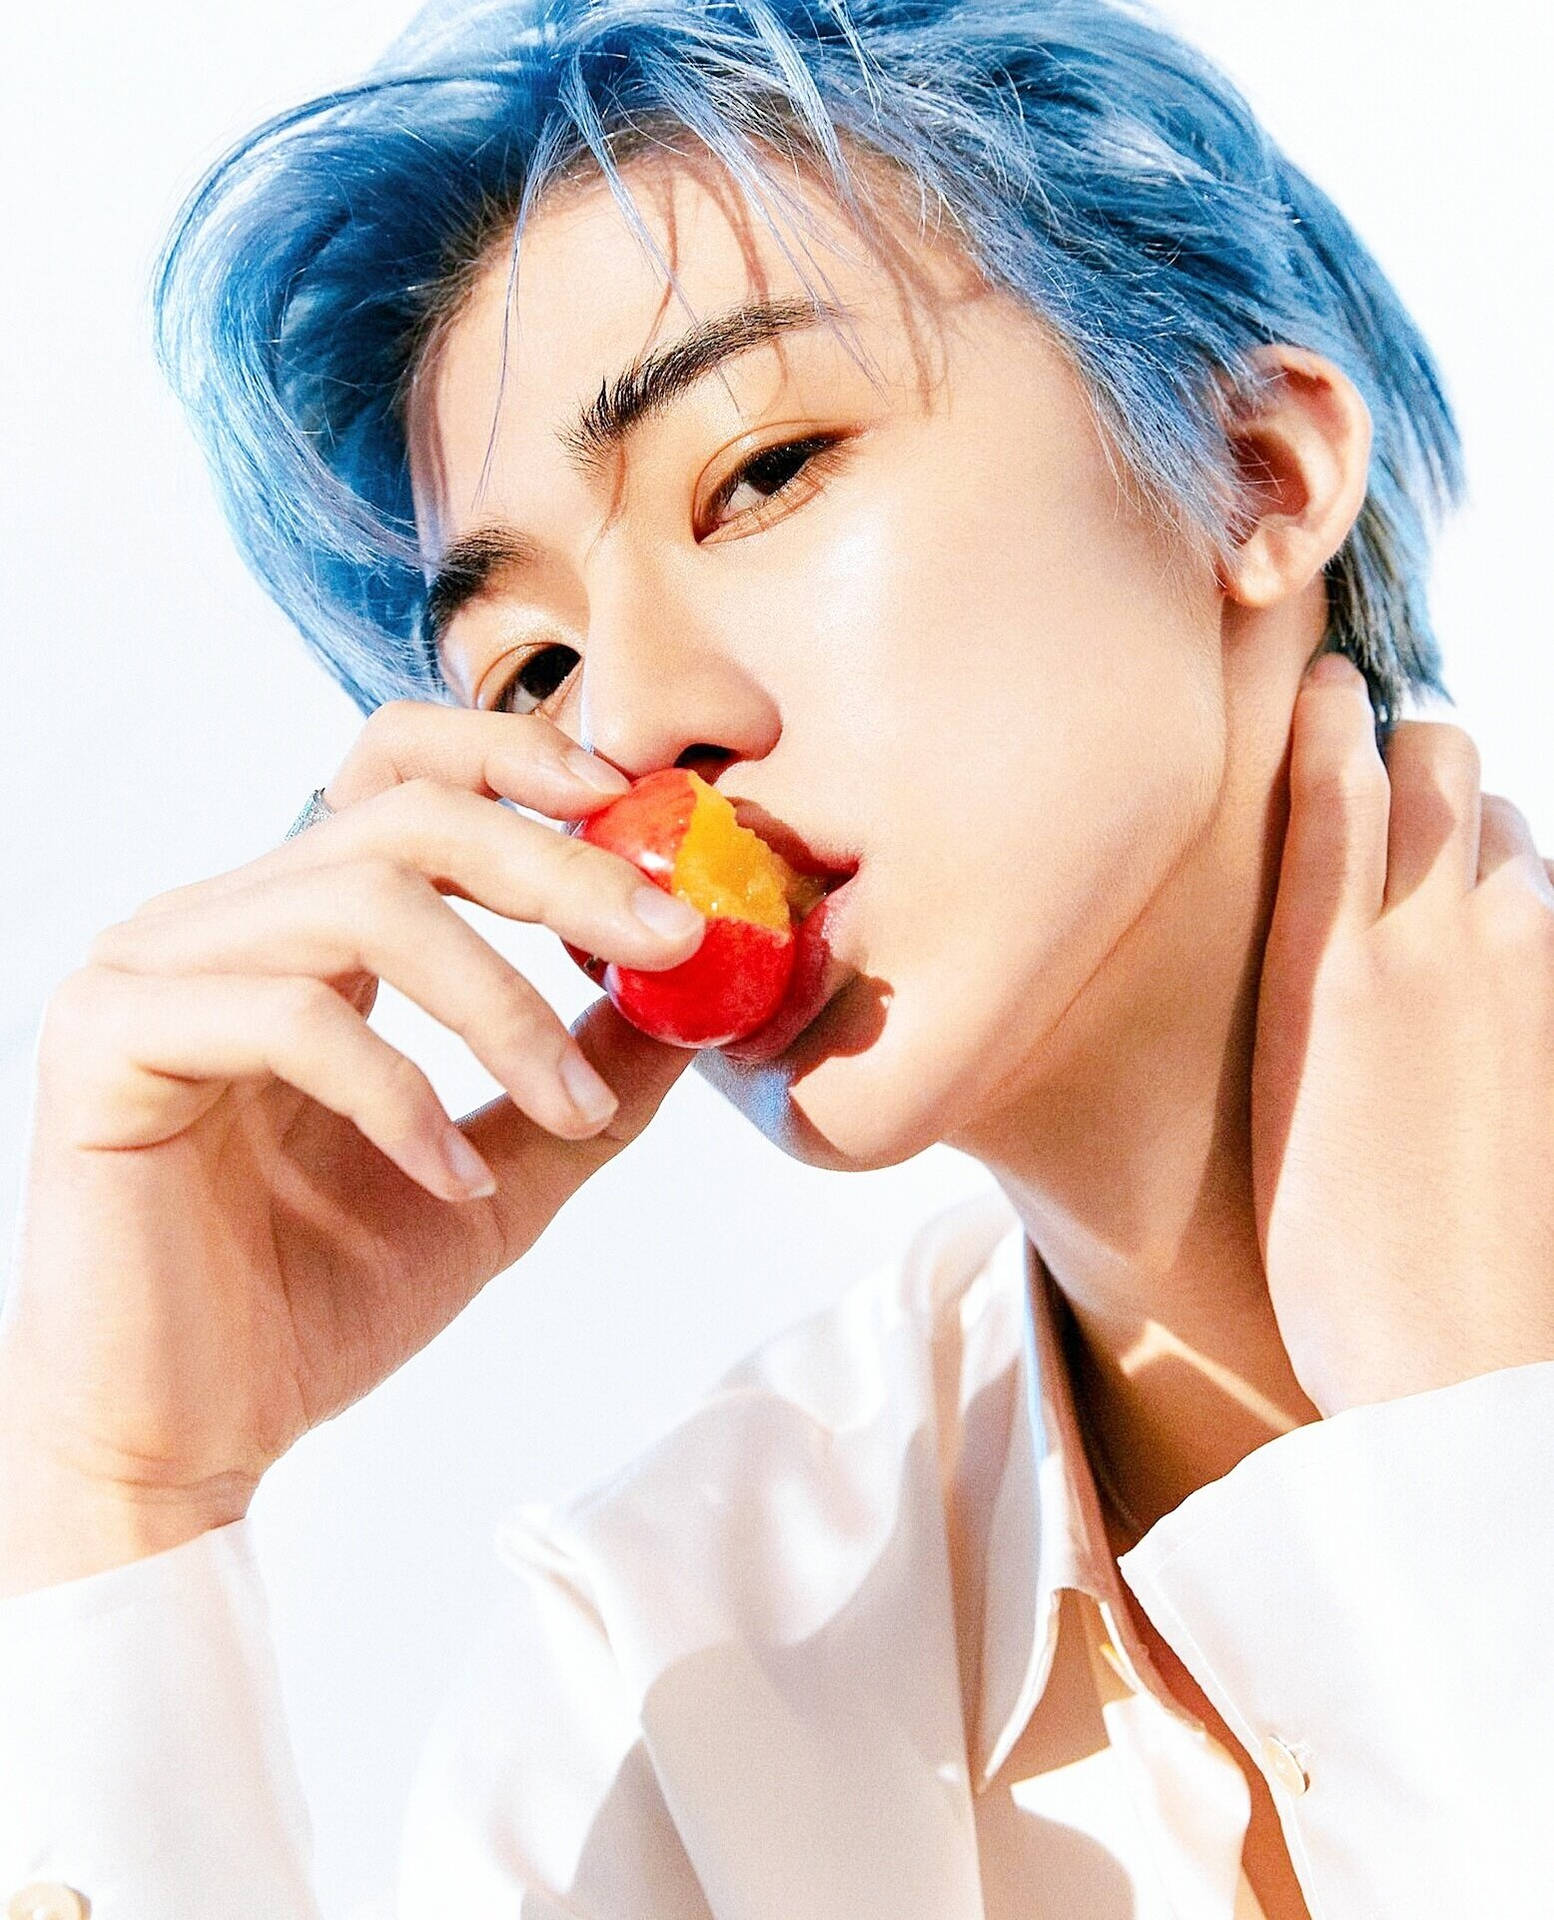 Jaemin Nct With Fruit Background